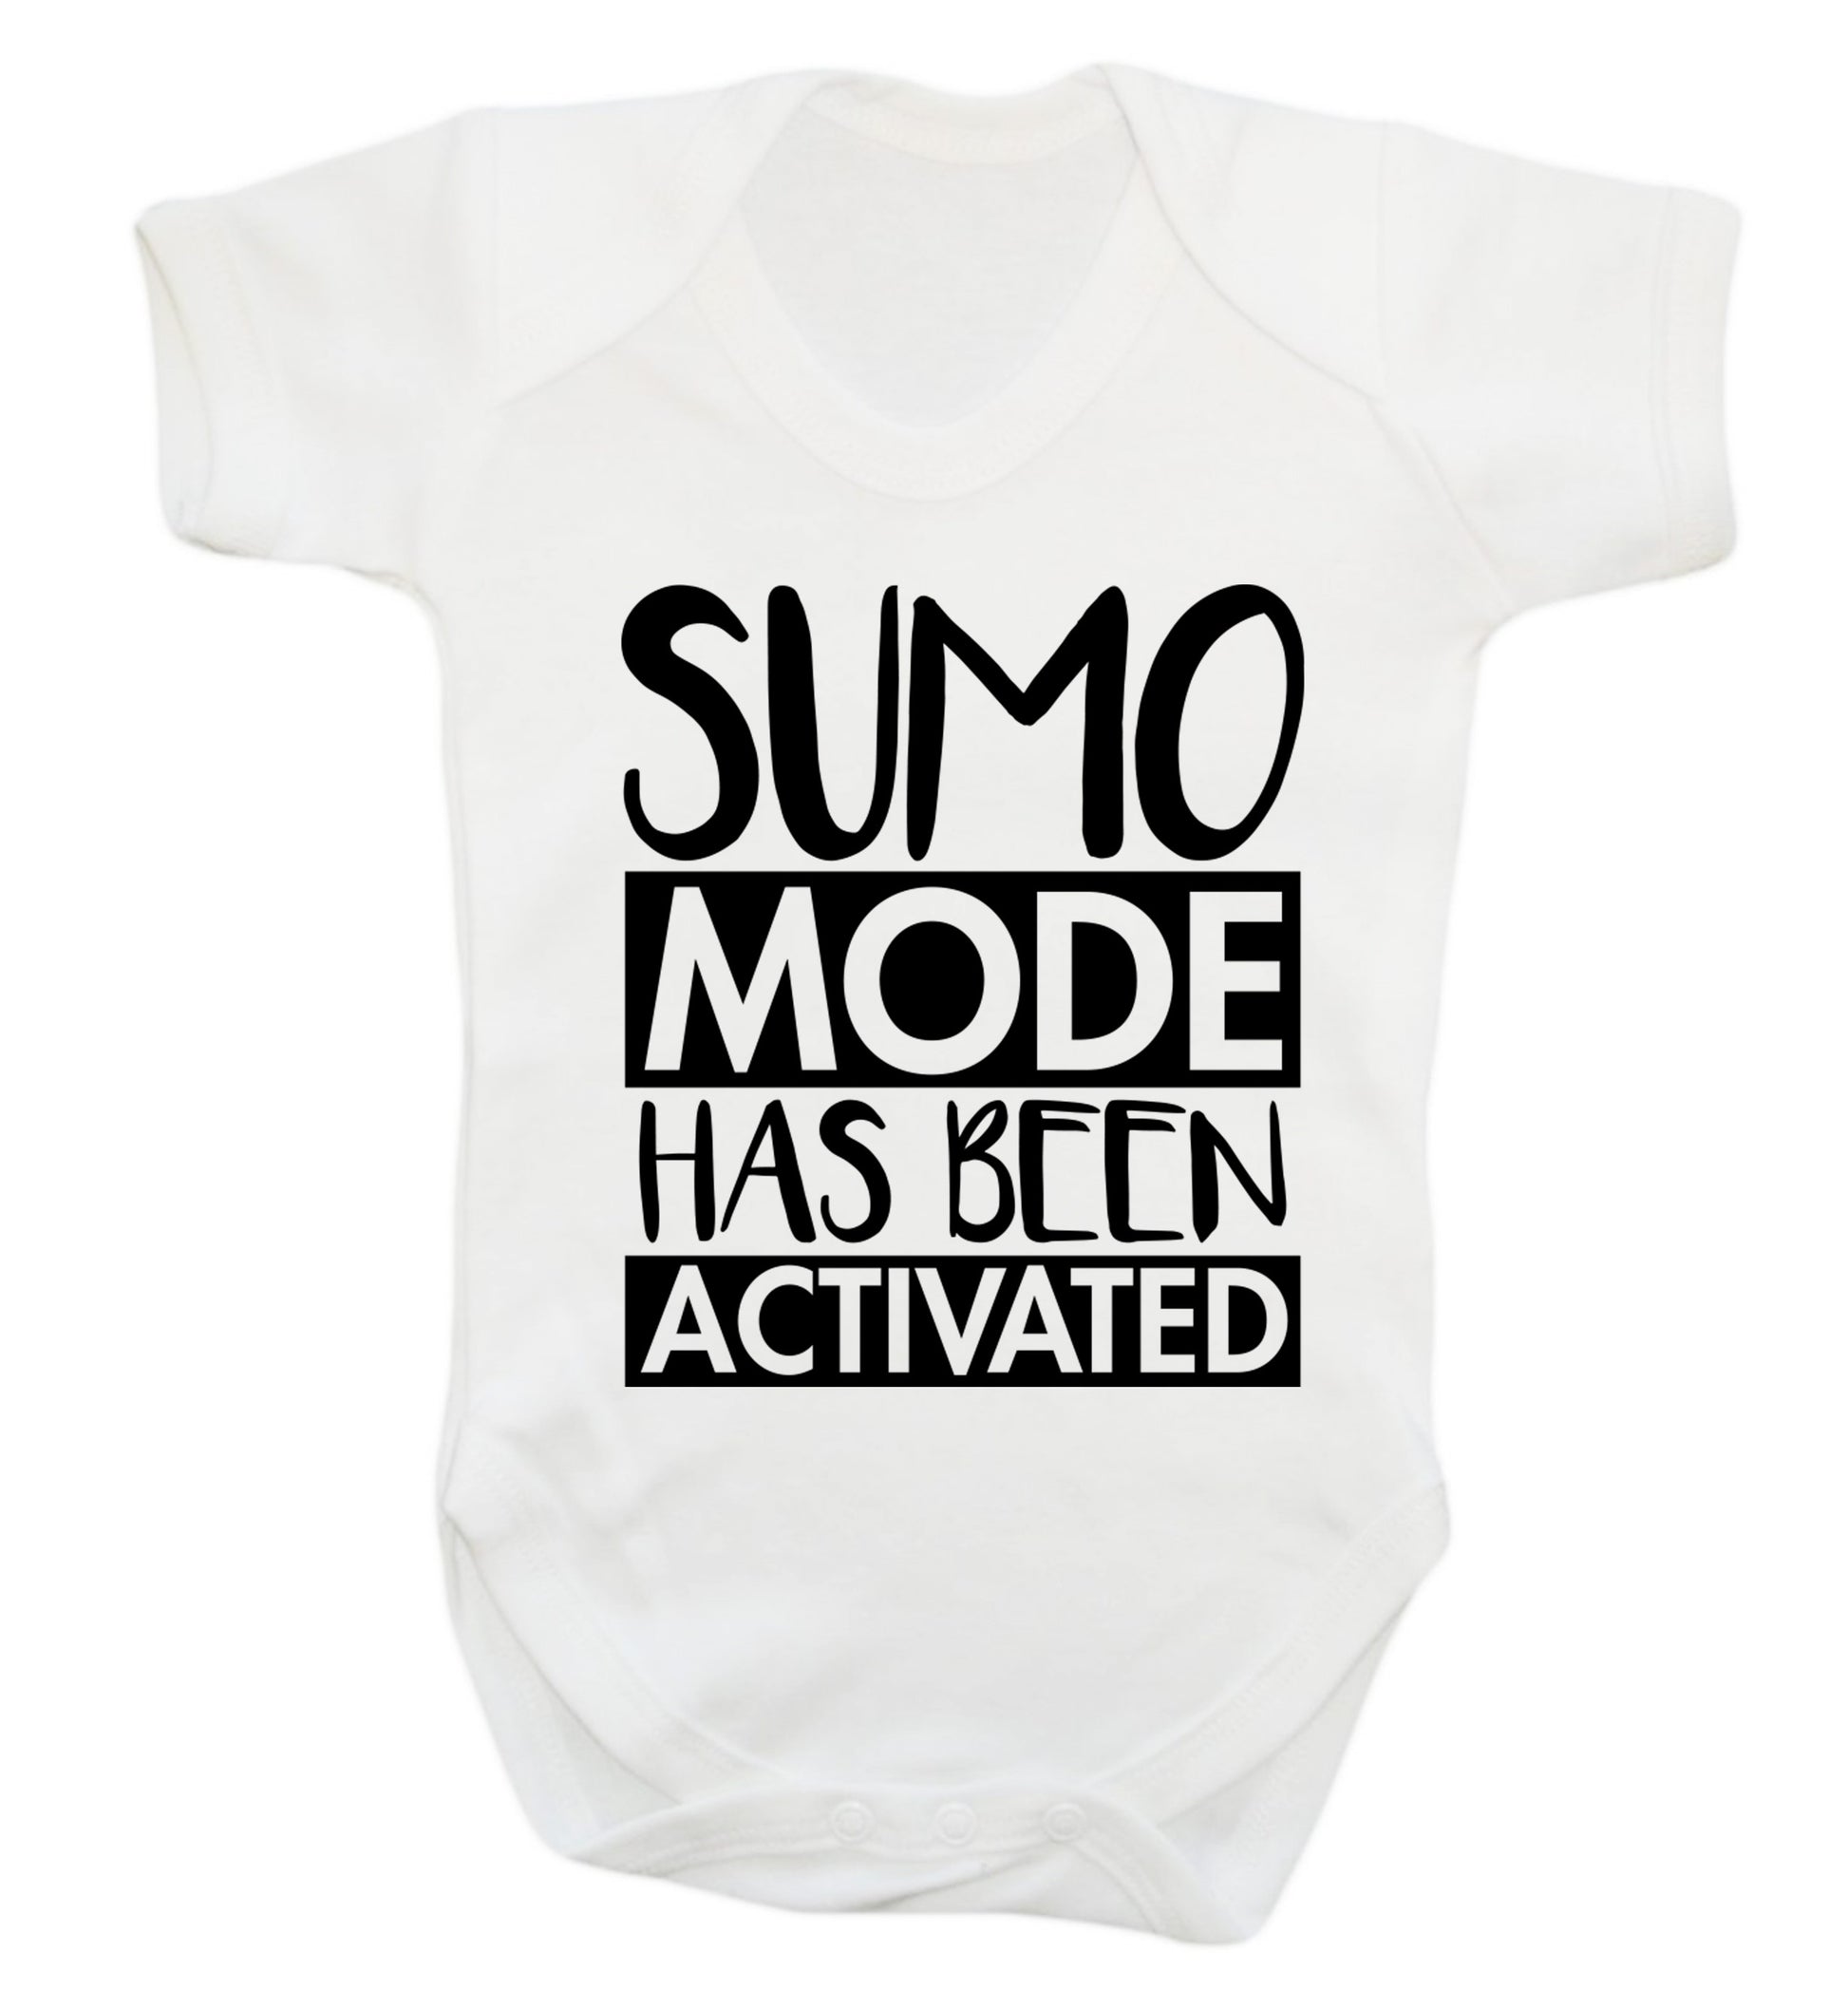 Sumo mode activated Baby Vest white 18-24 months